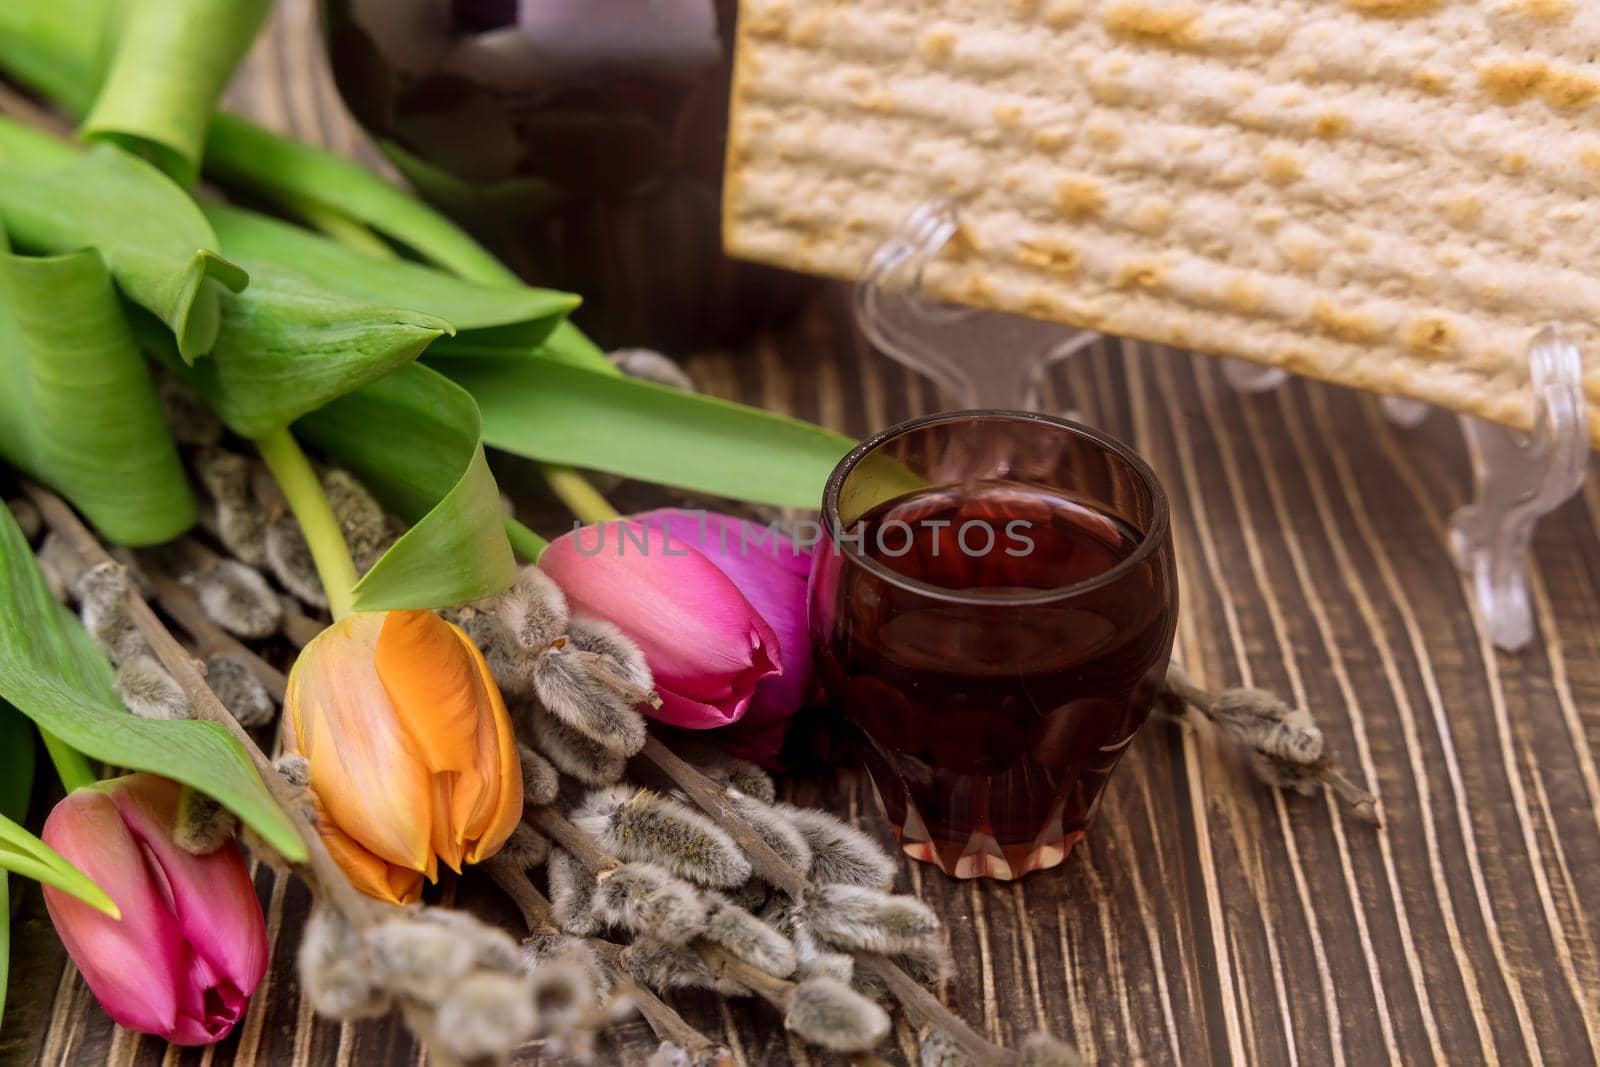 Jewish traditional the ceremony ritual for Passover holiday celebration of kosher wine cup and matzah bread on Pesach Blessings